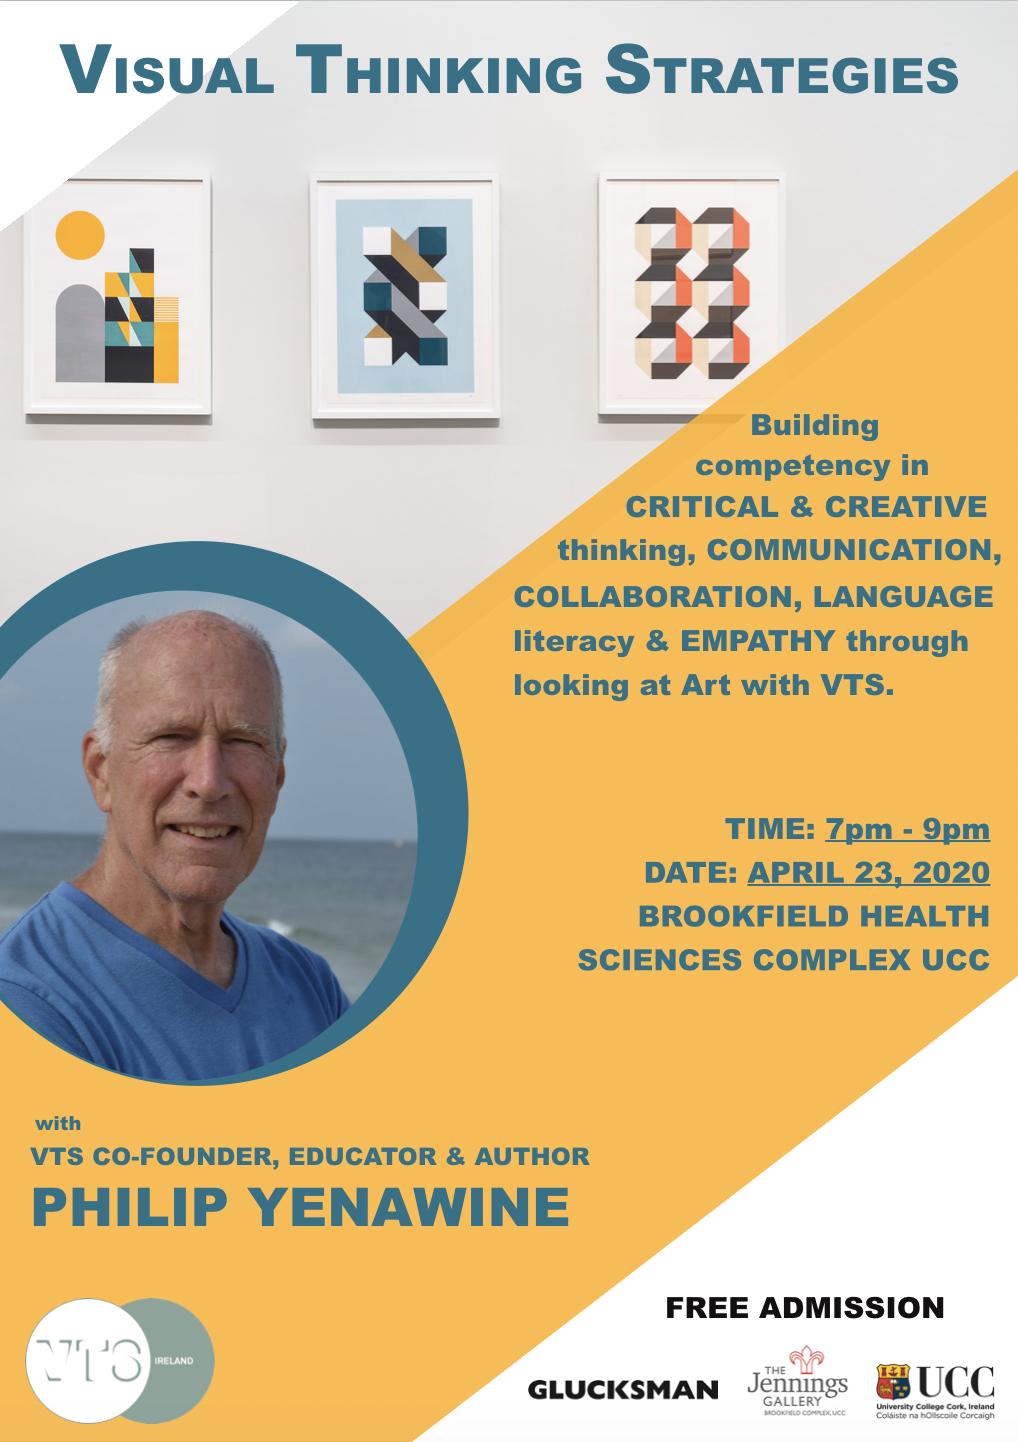 Visual Thinking Strategies with co-founder Philip Yenawine